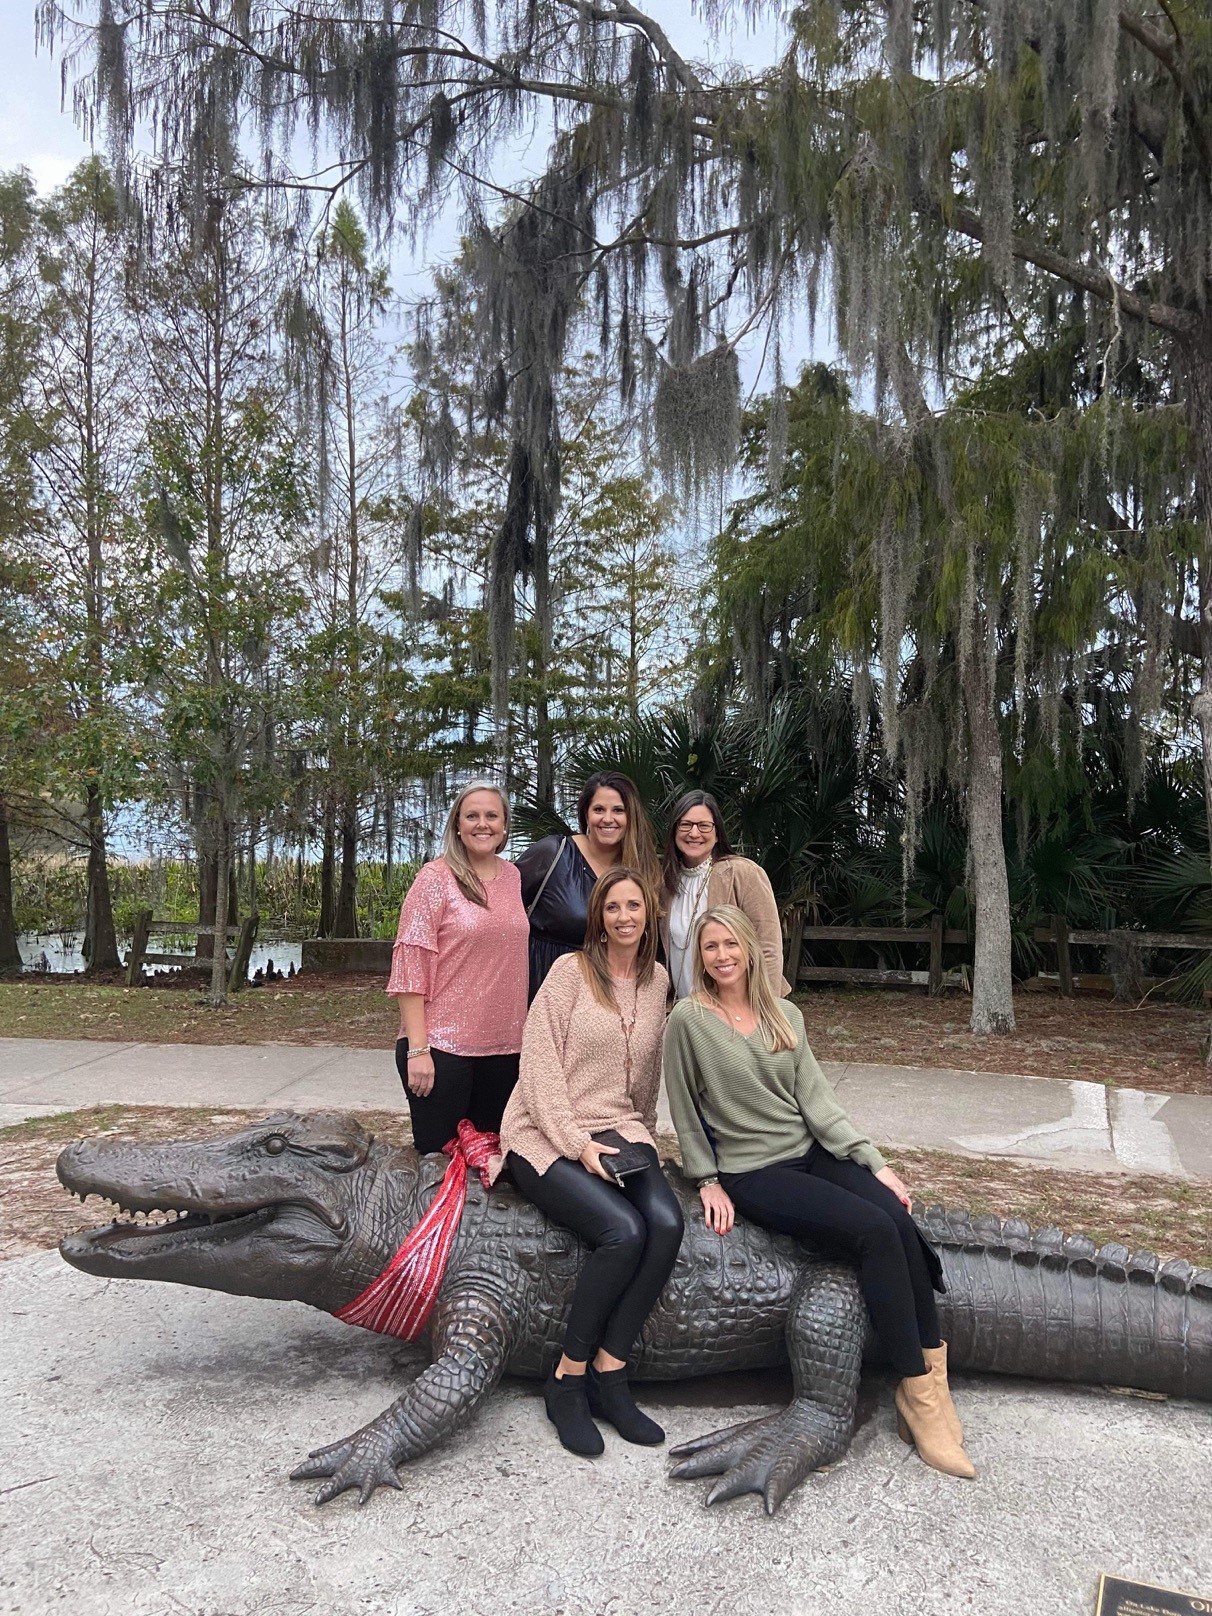 five women pose for picture some sitting on giant alligator statue and some standing behind them with trees in the background